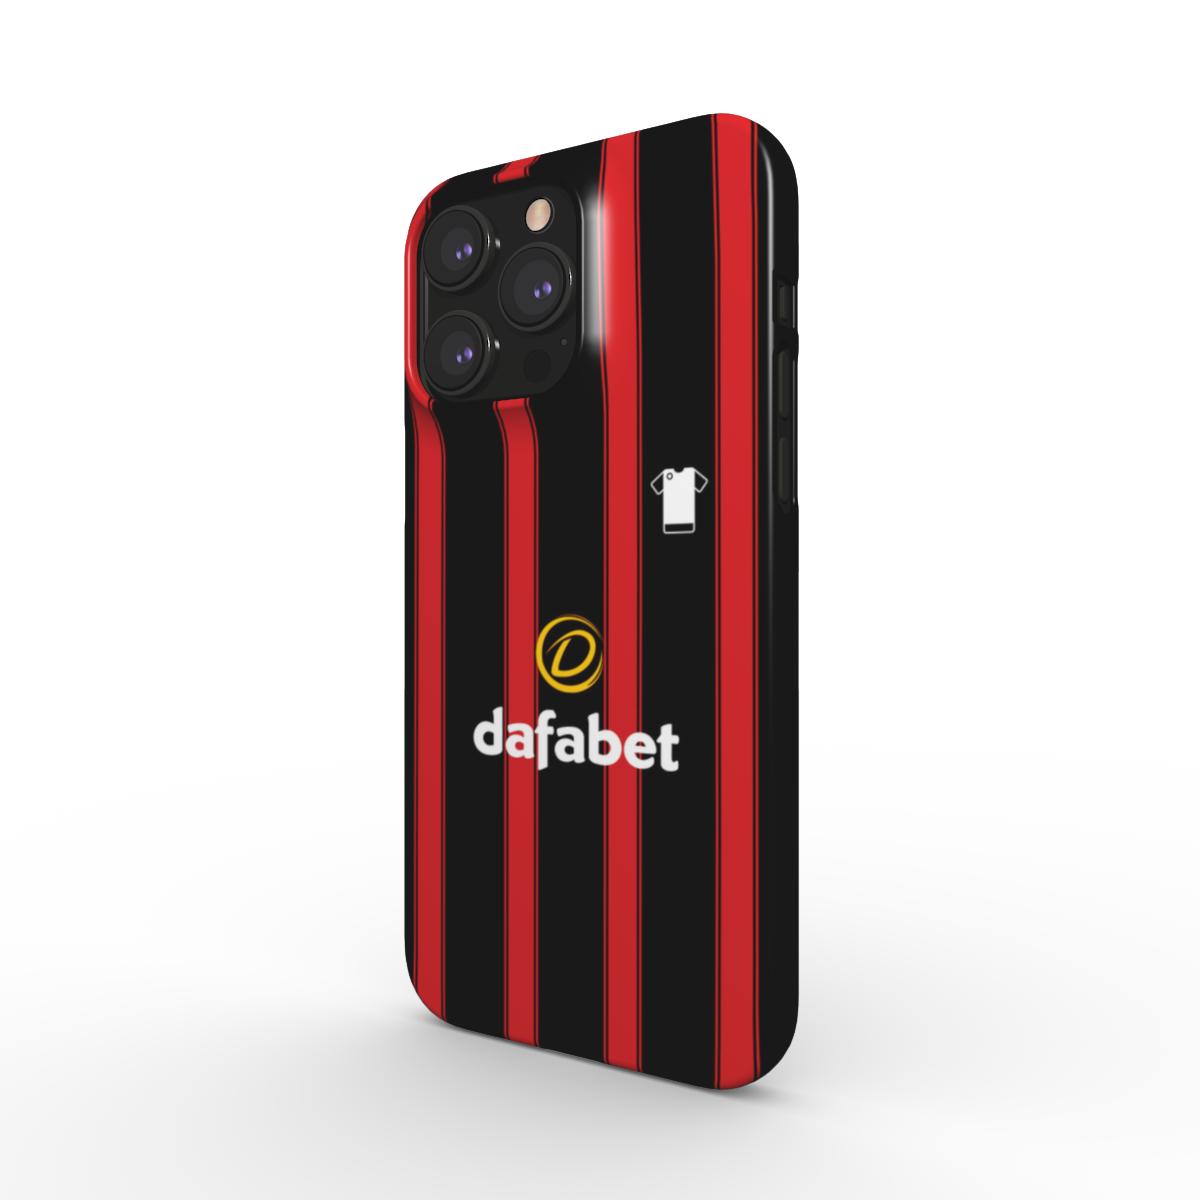 AFC Bournemouth 2023/24 - Home Kit Snap Phone Case